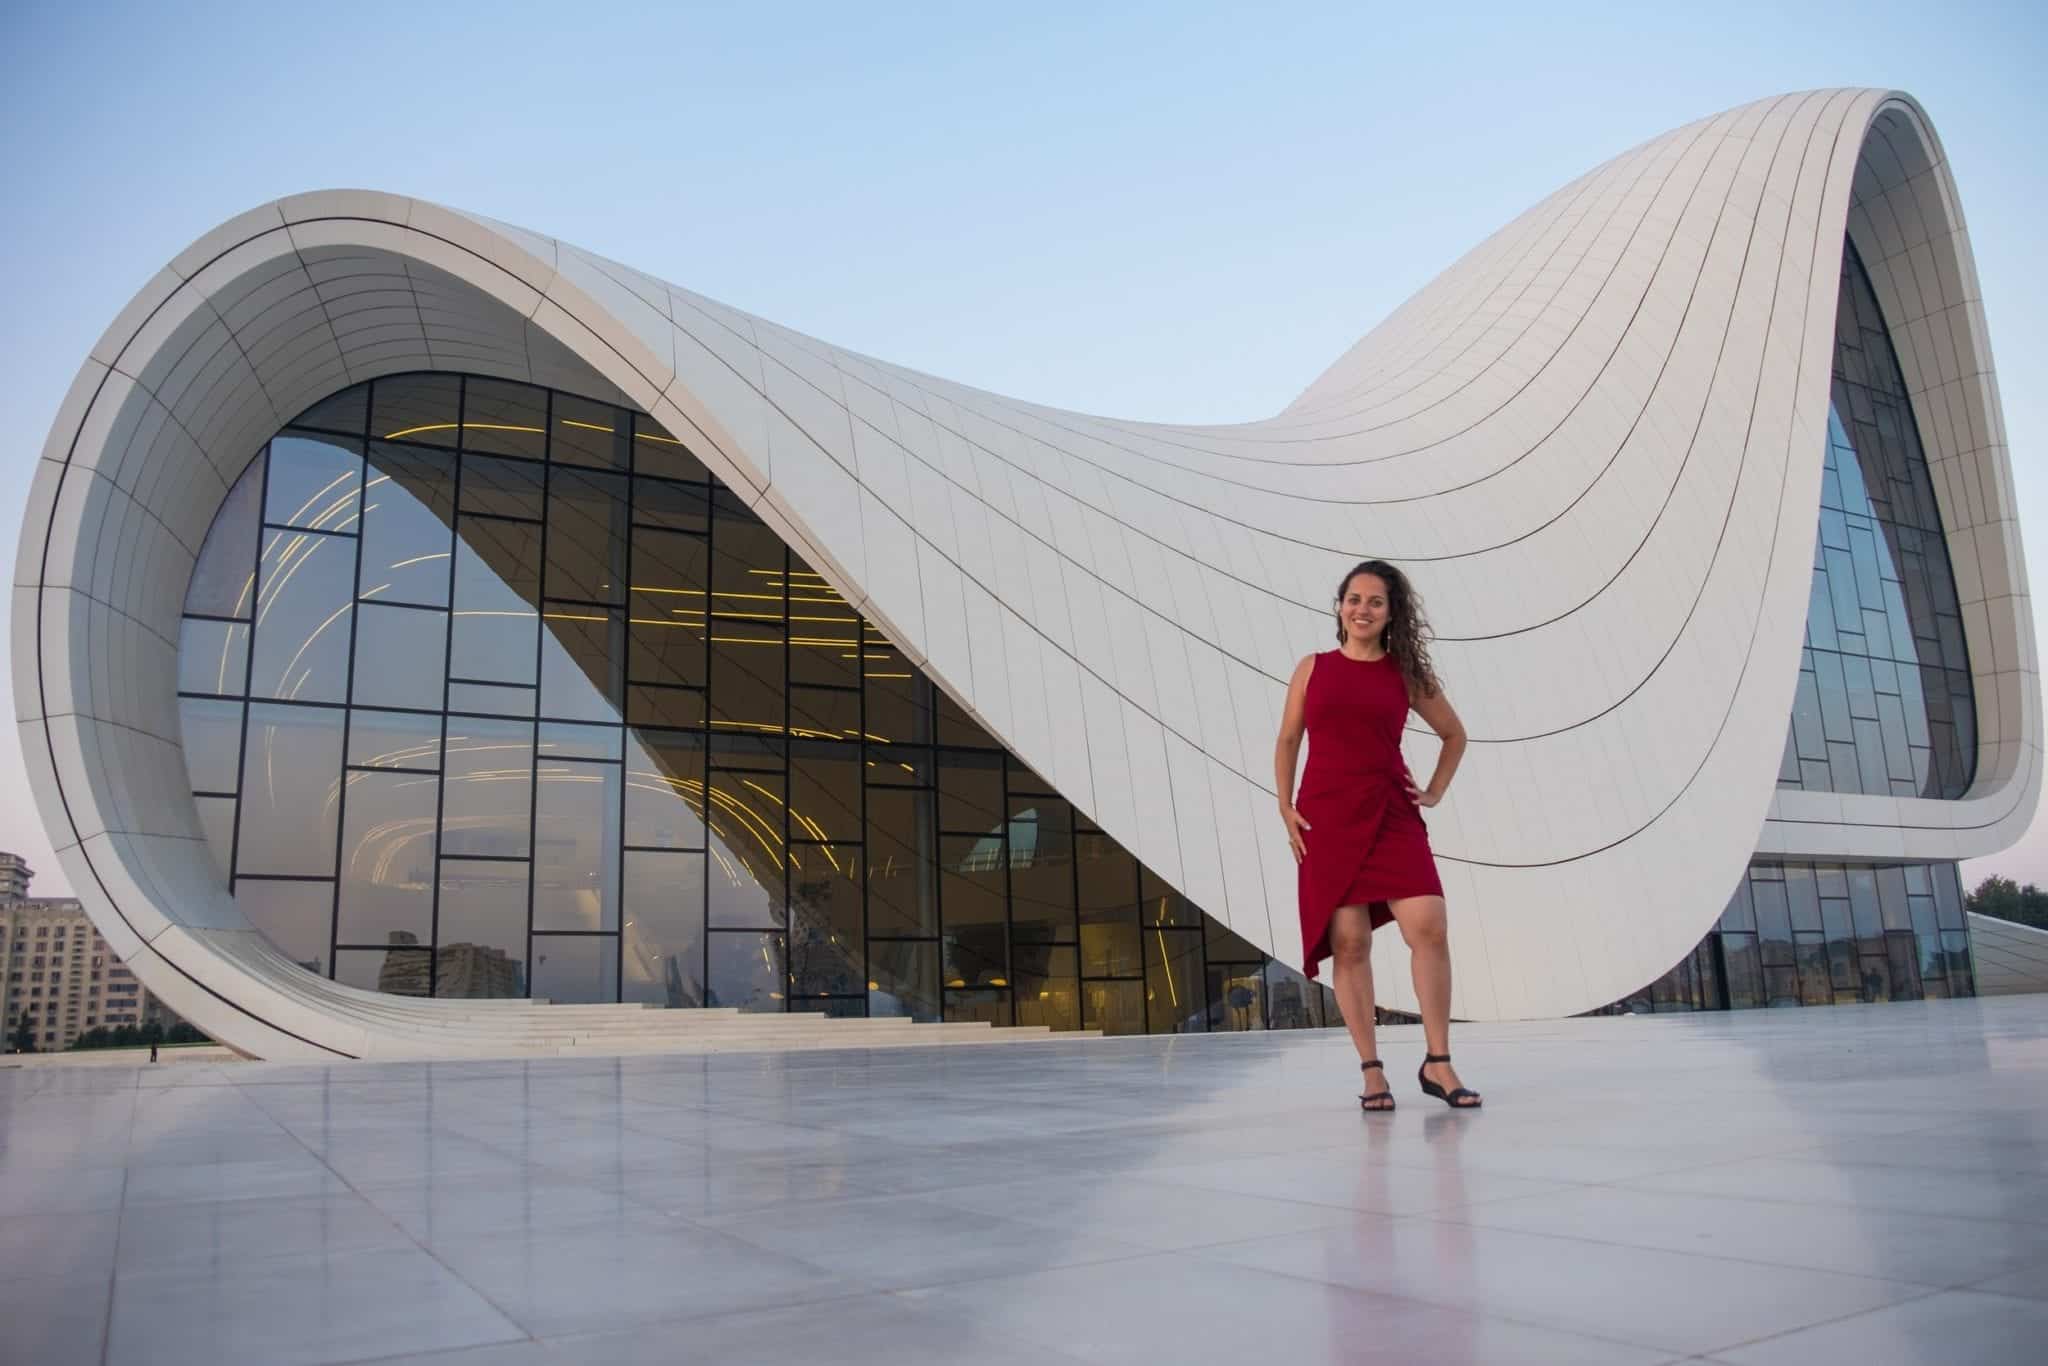 Kate poses in a red dress in front of the white swooping curvy roof and glass wall of the Heydar Aliyev Center in Baku, Azerbaijan.